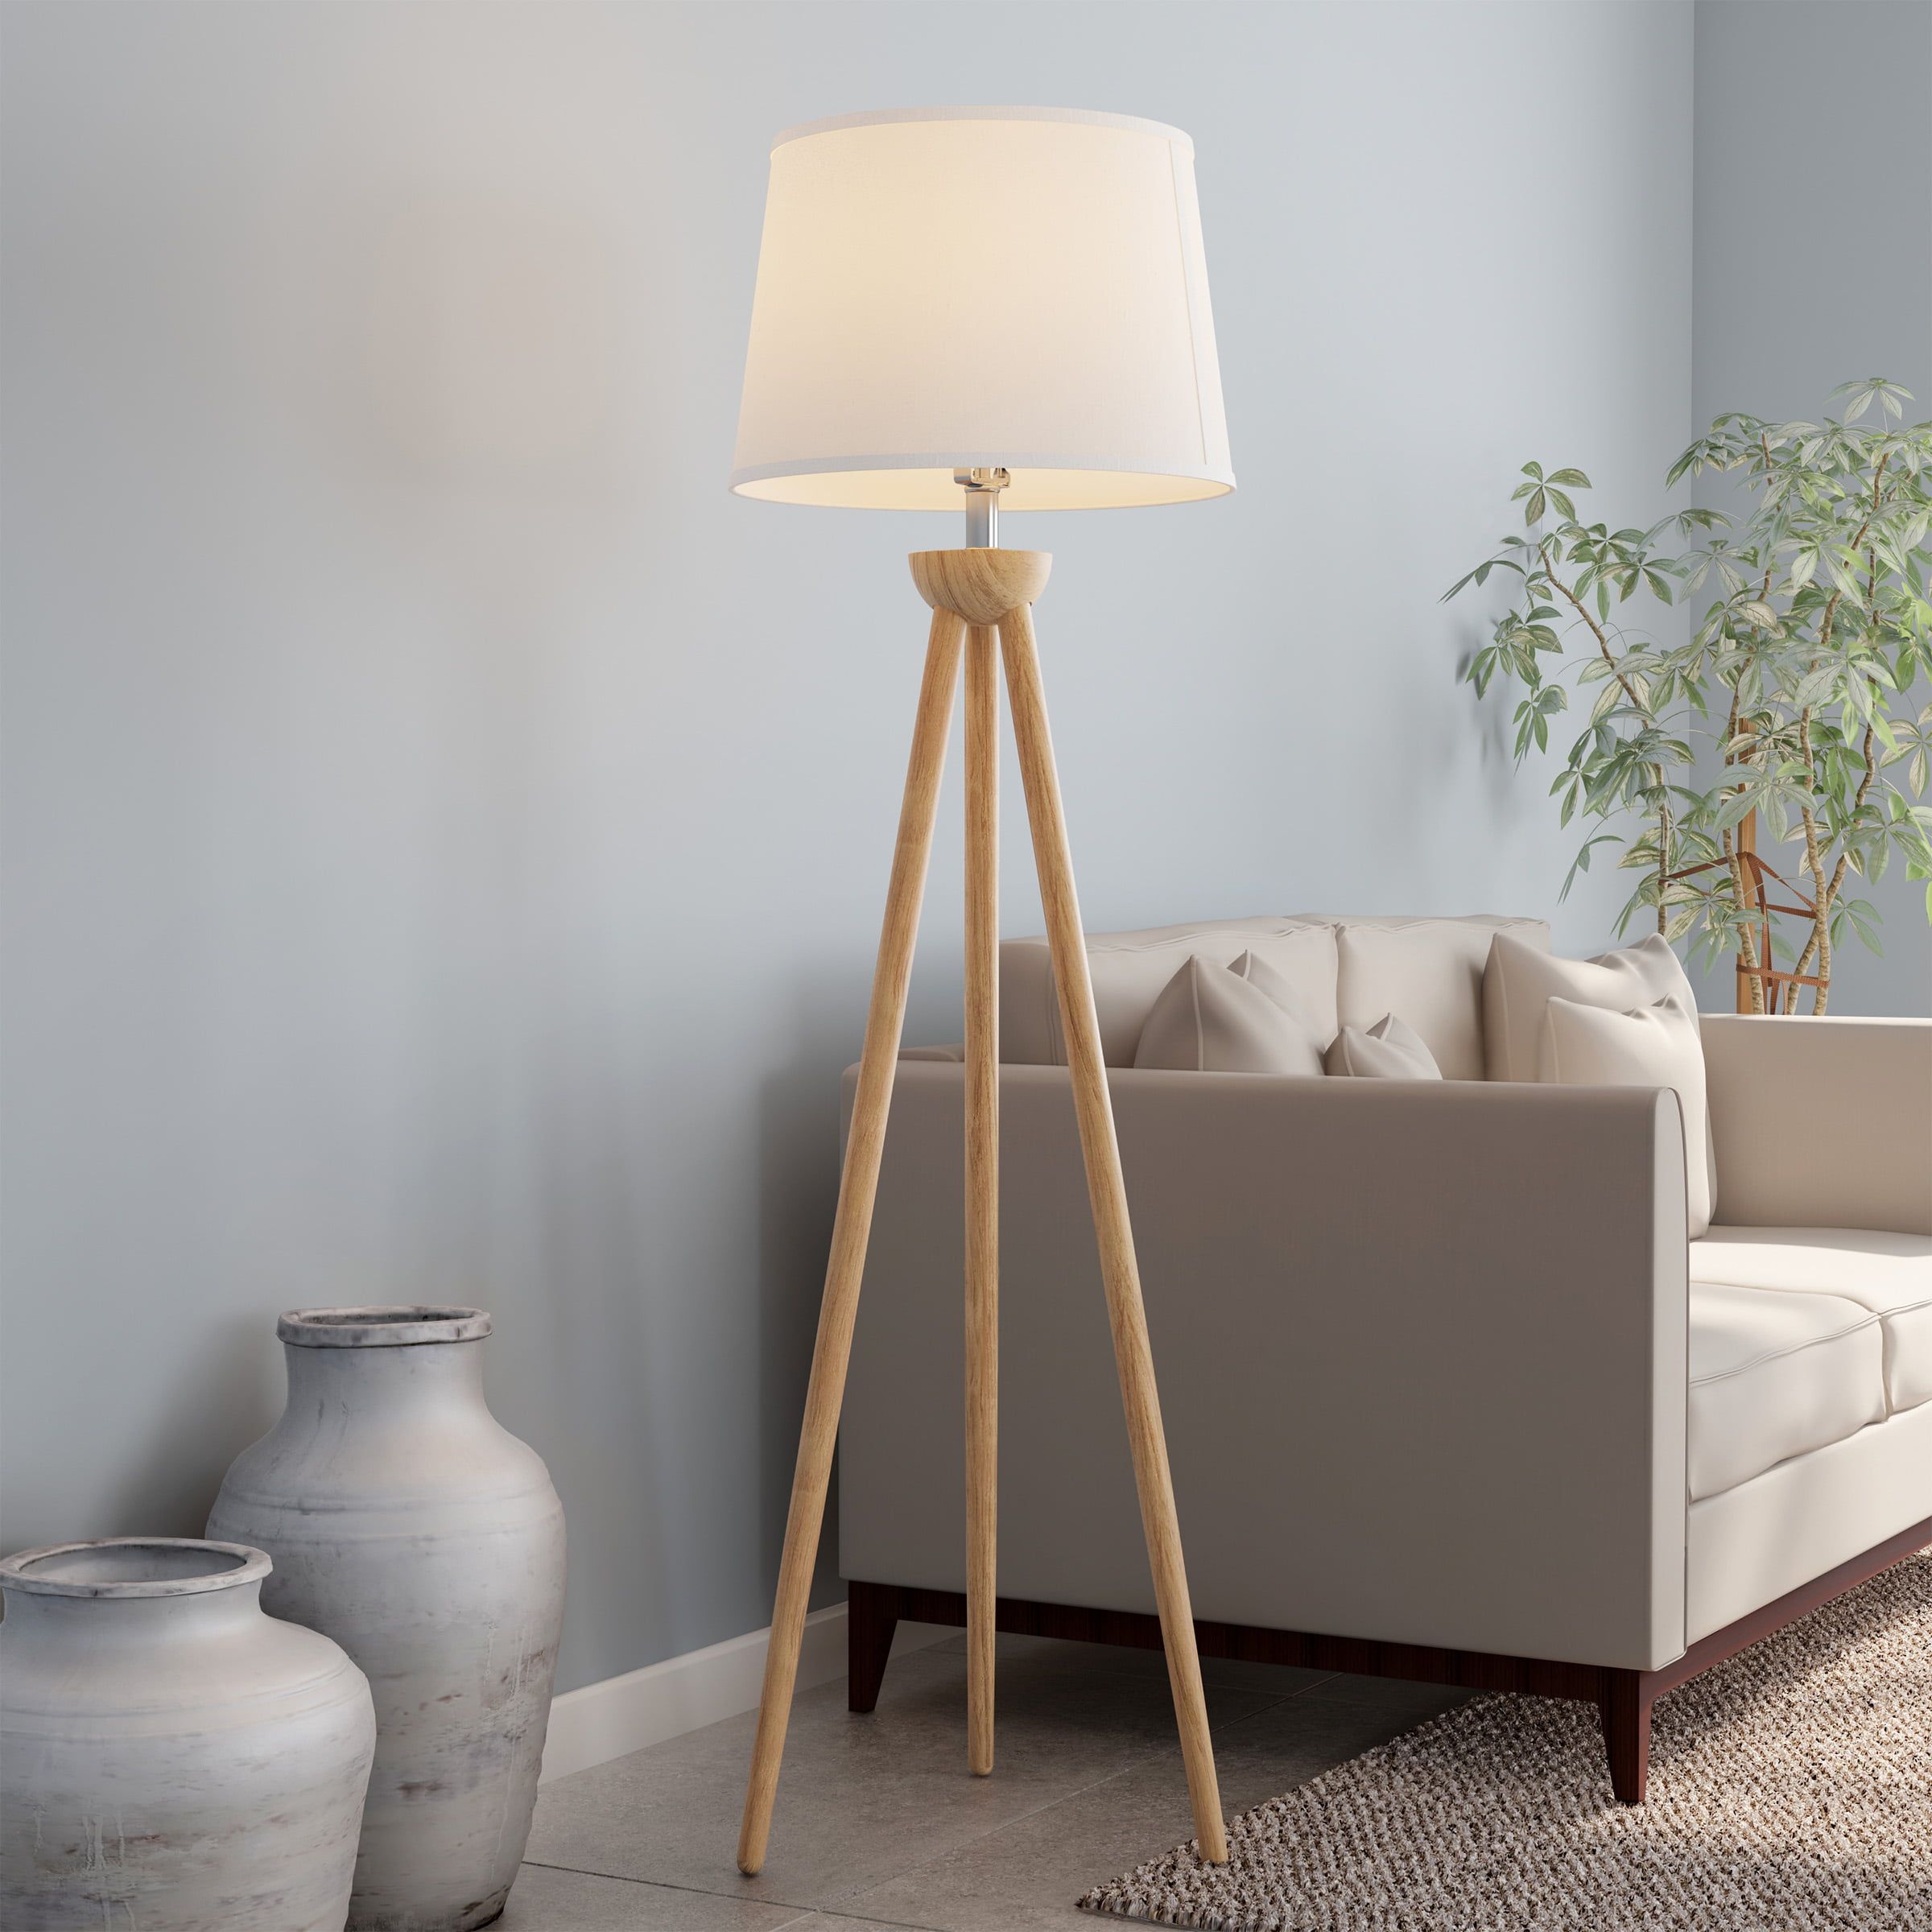 Lavish Home Tripod Floor Lamp With Led Bulb And Natural Oak Wood Base –  Walmart With Regard To Tripod Floor Lamps (View 3 of 15)